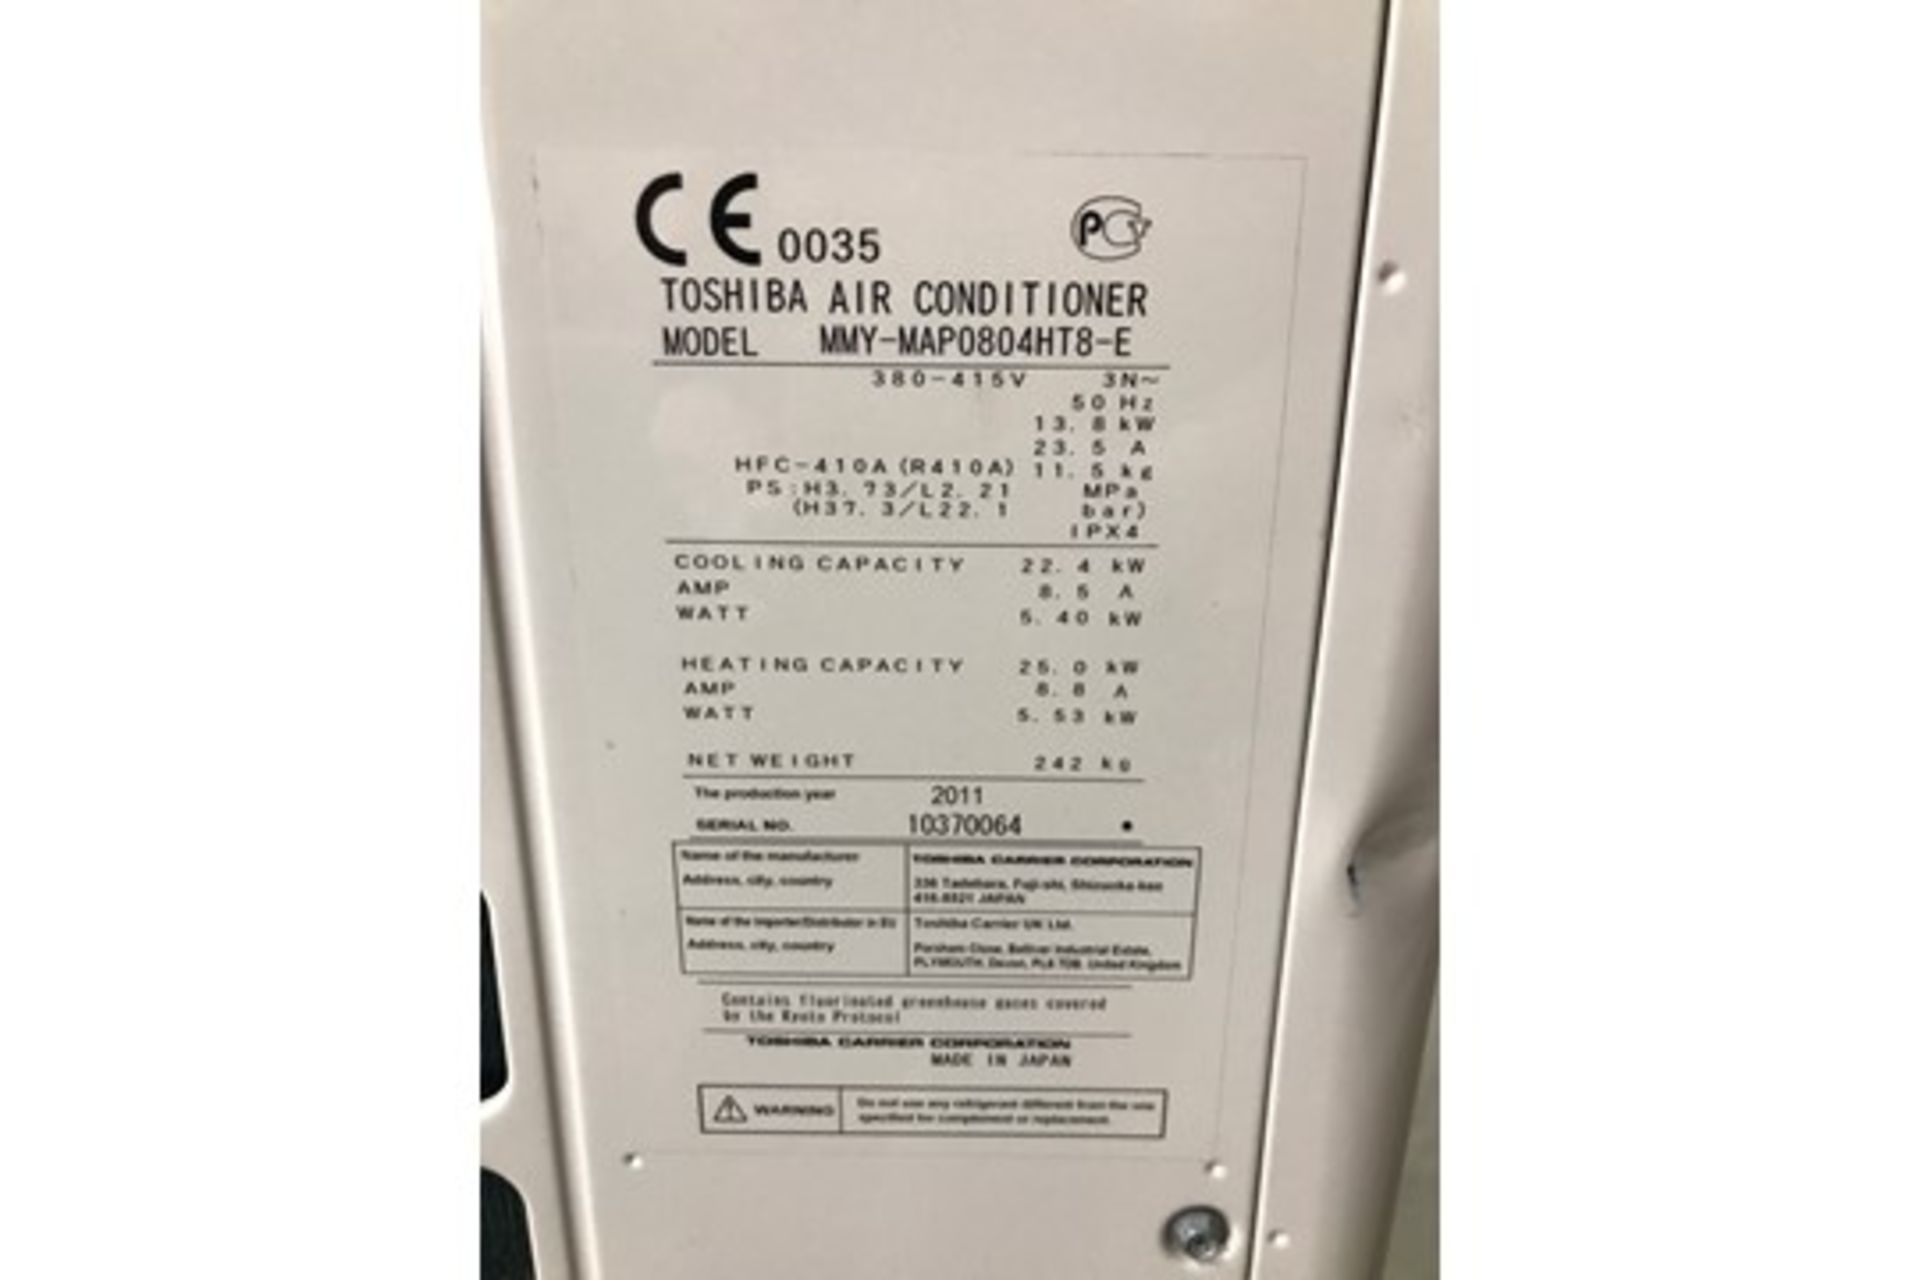 Toshiba SMMSi MMY-MAP0804HT8-E Outdoor Air Conditioning Unit | 2011 - Image 2 of 3